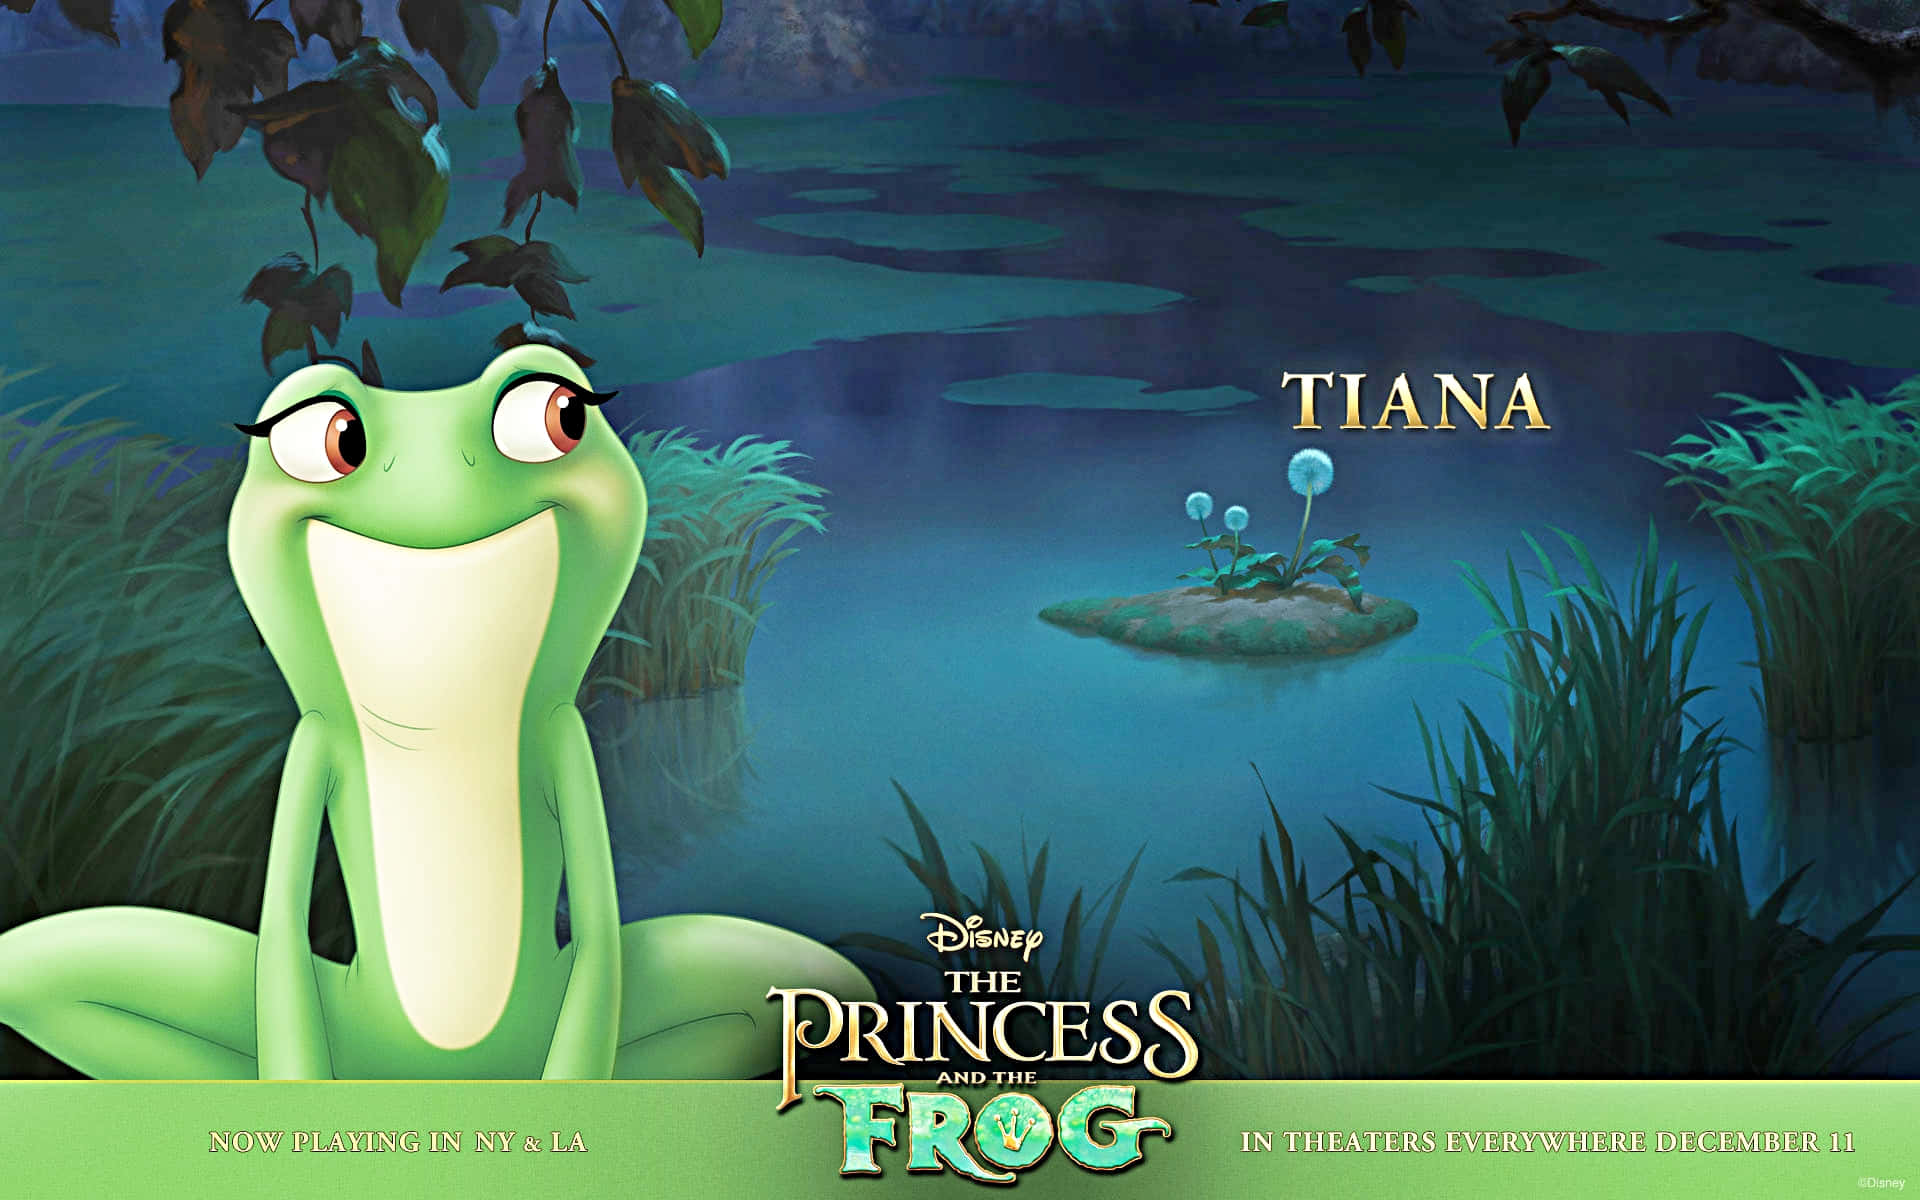 Two friends, Tiana and Naveen, sharing an unforgettable moment together